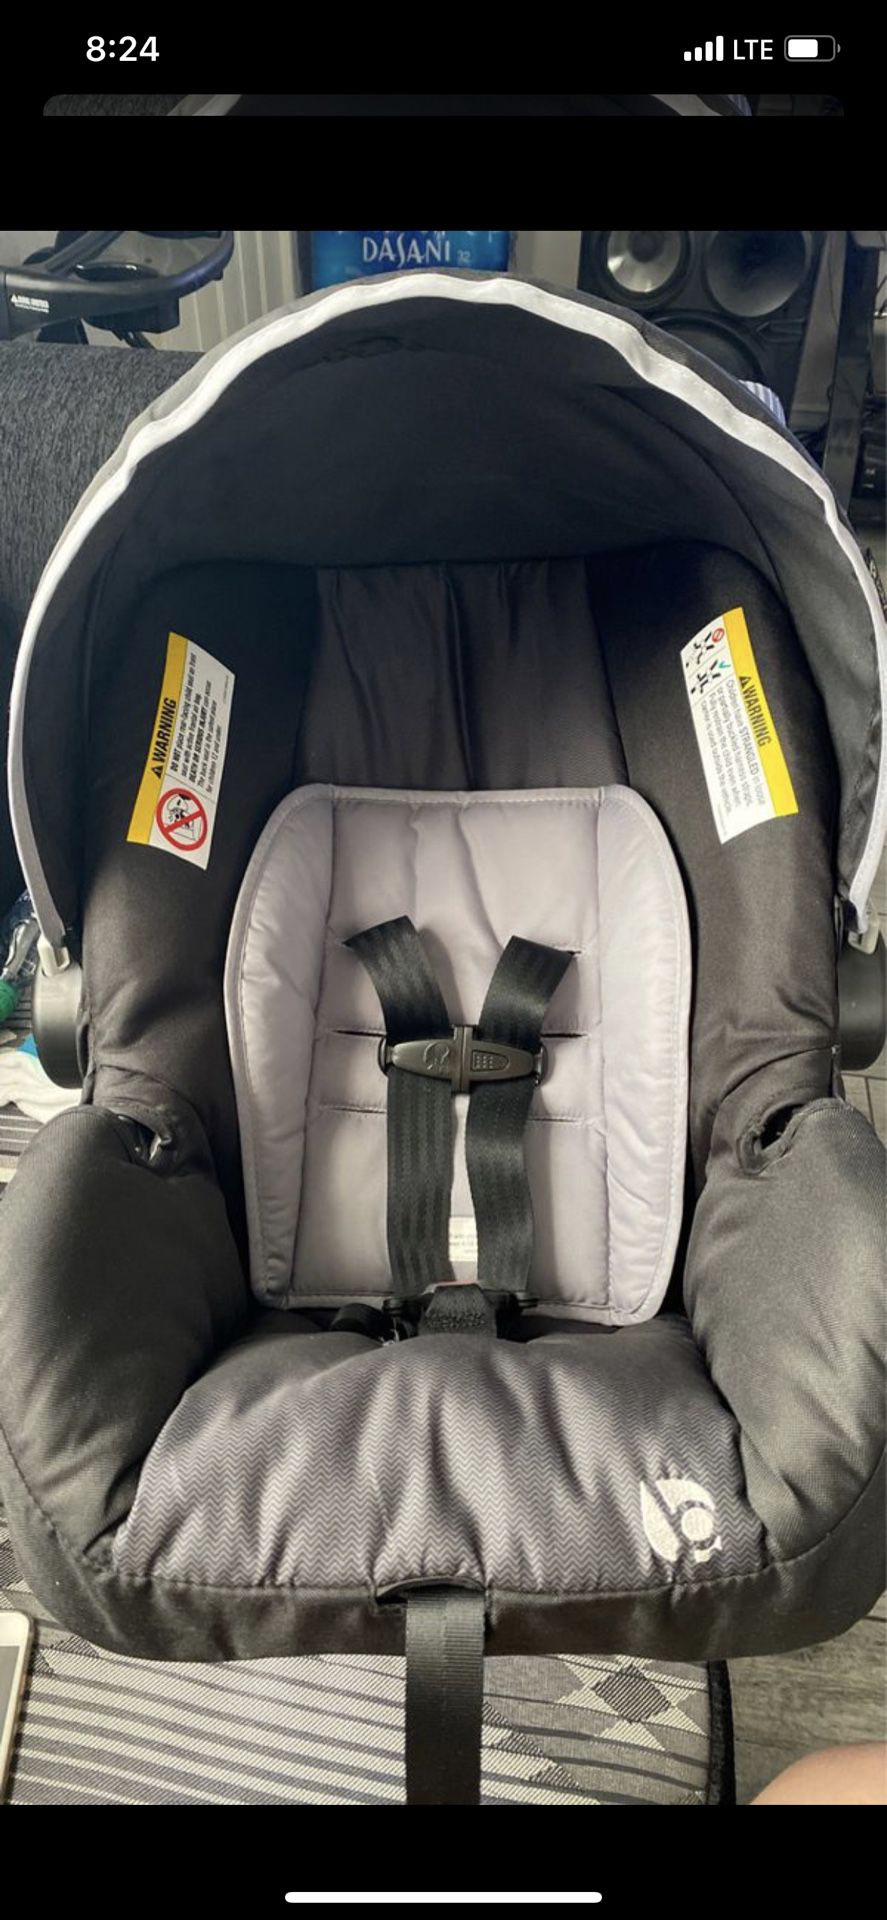 Babytrend stroller and car seat